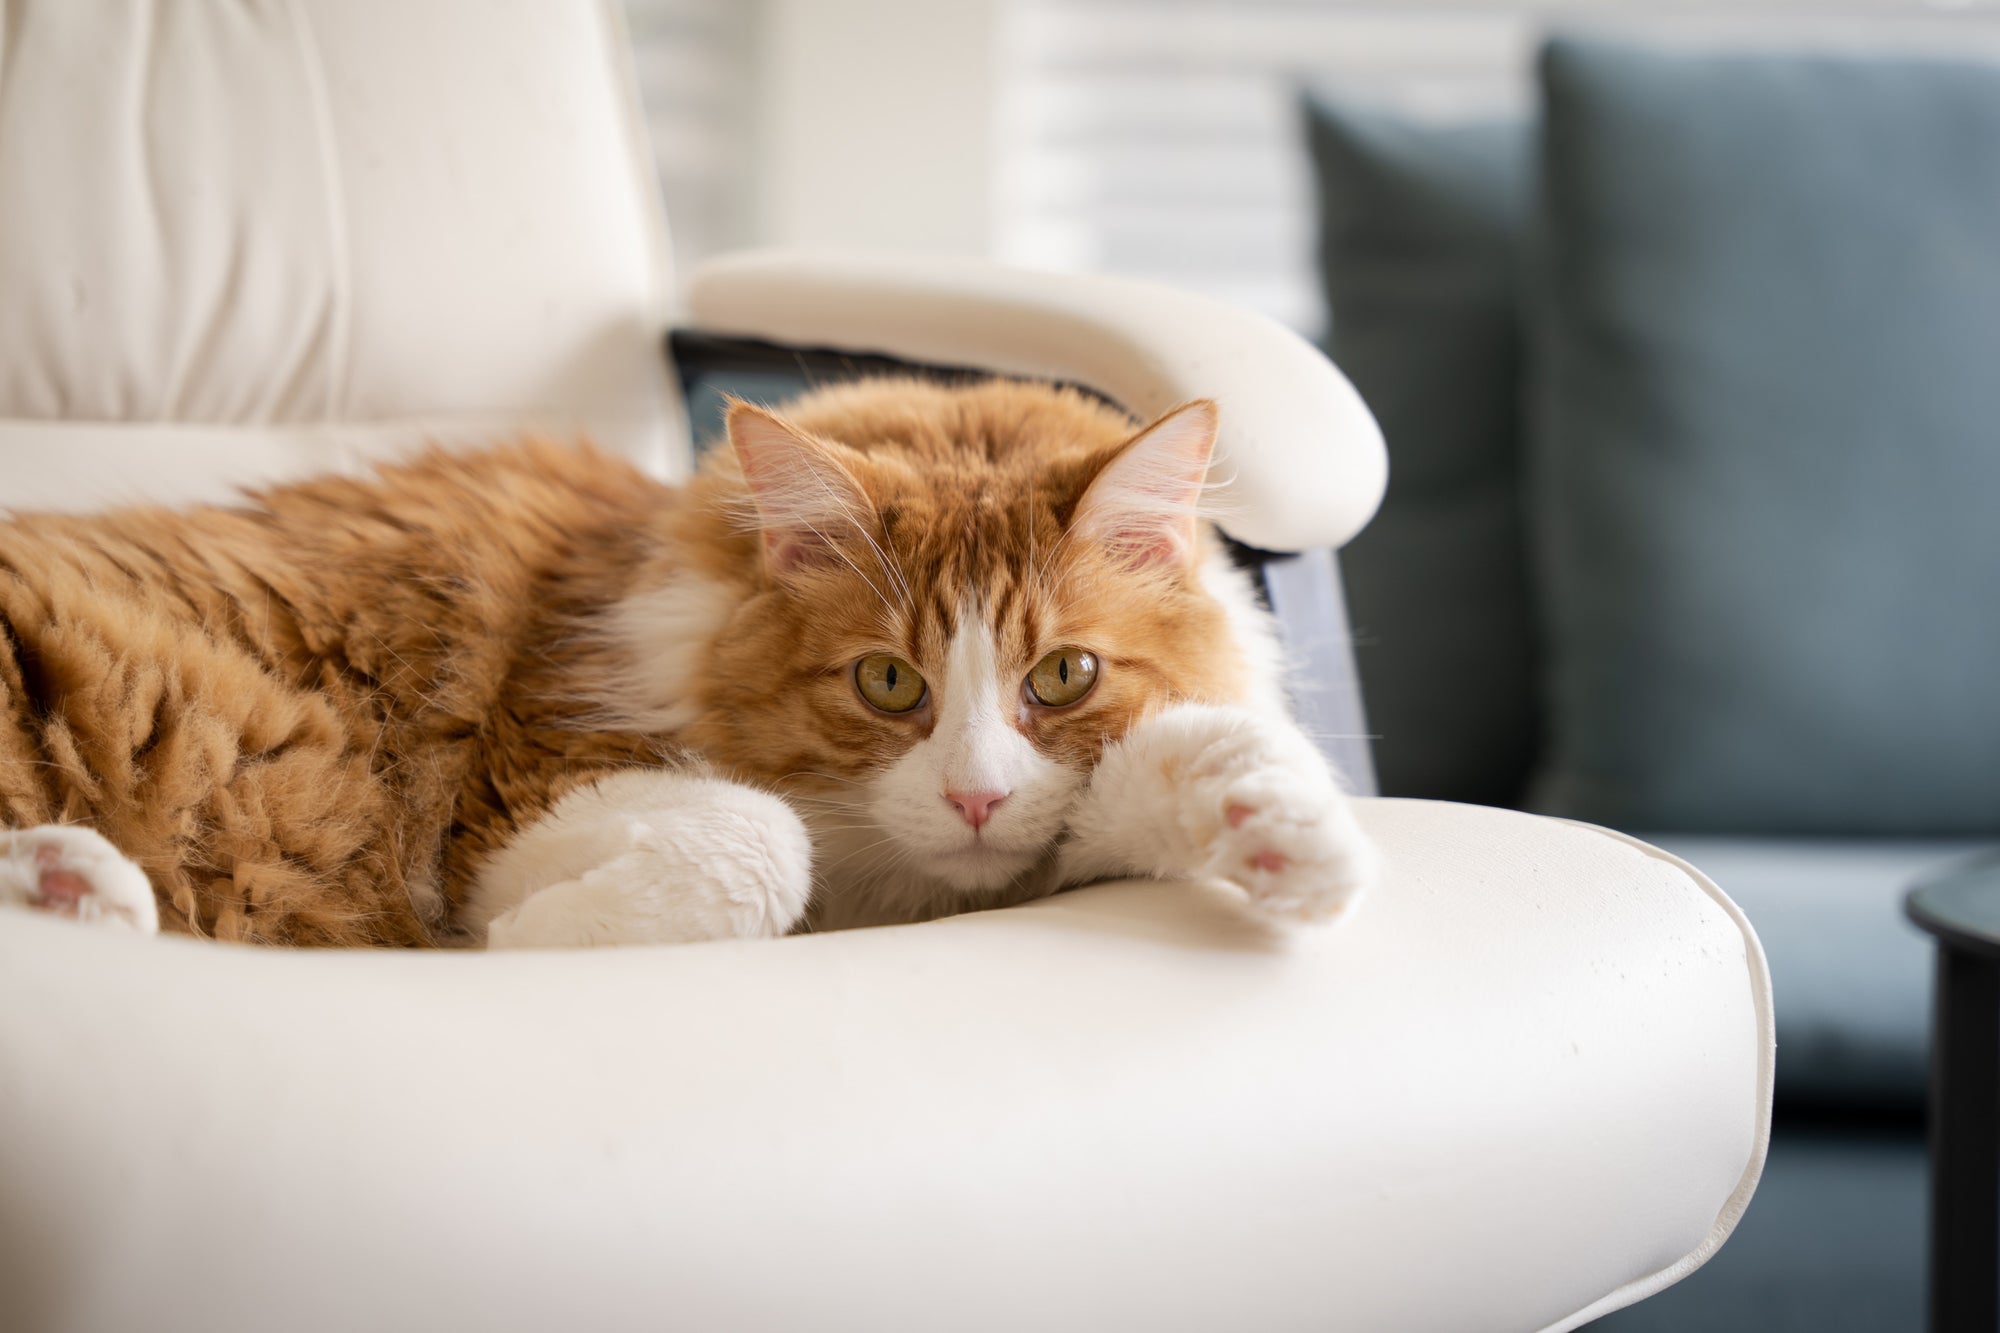 My Older Cat is Drinking But Not Eating: 6 Ways to Help